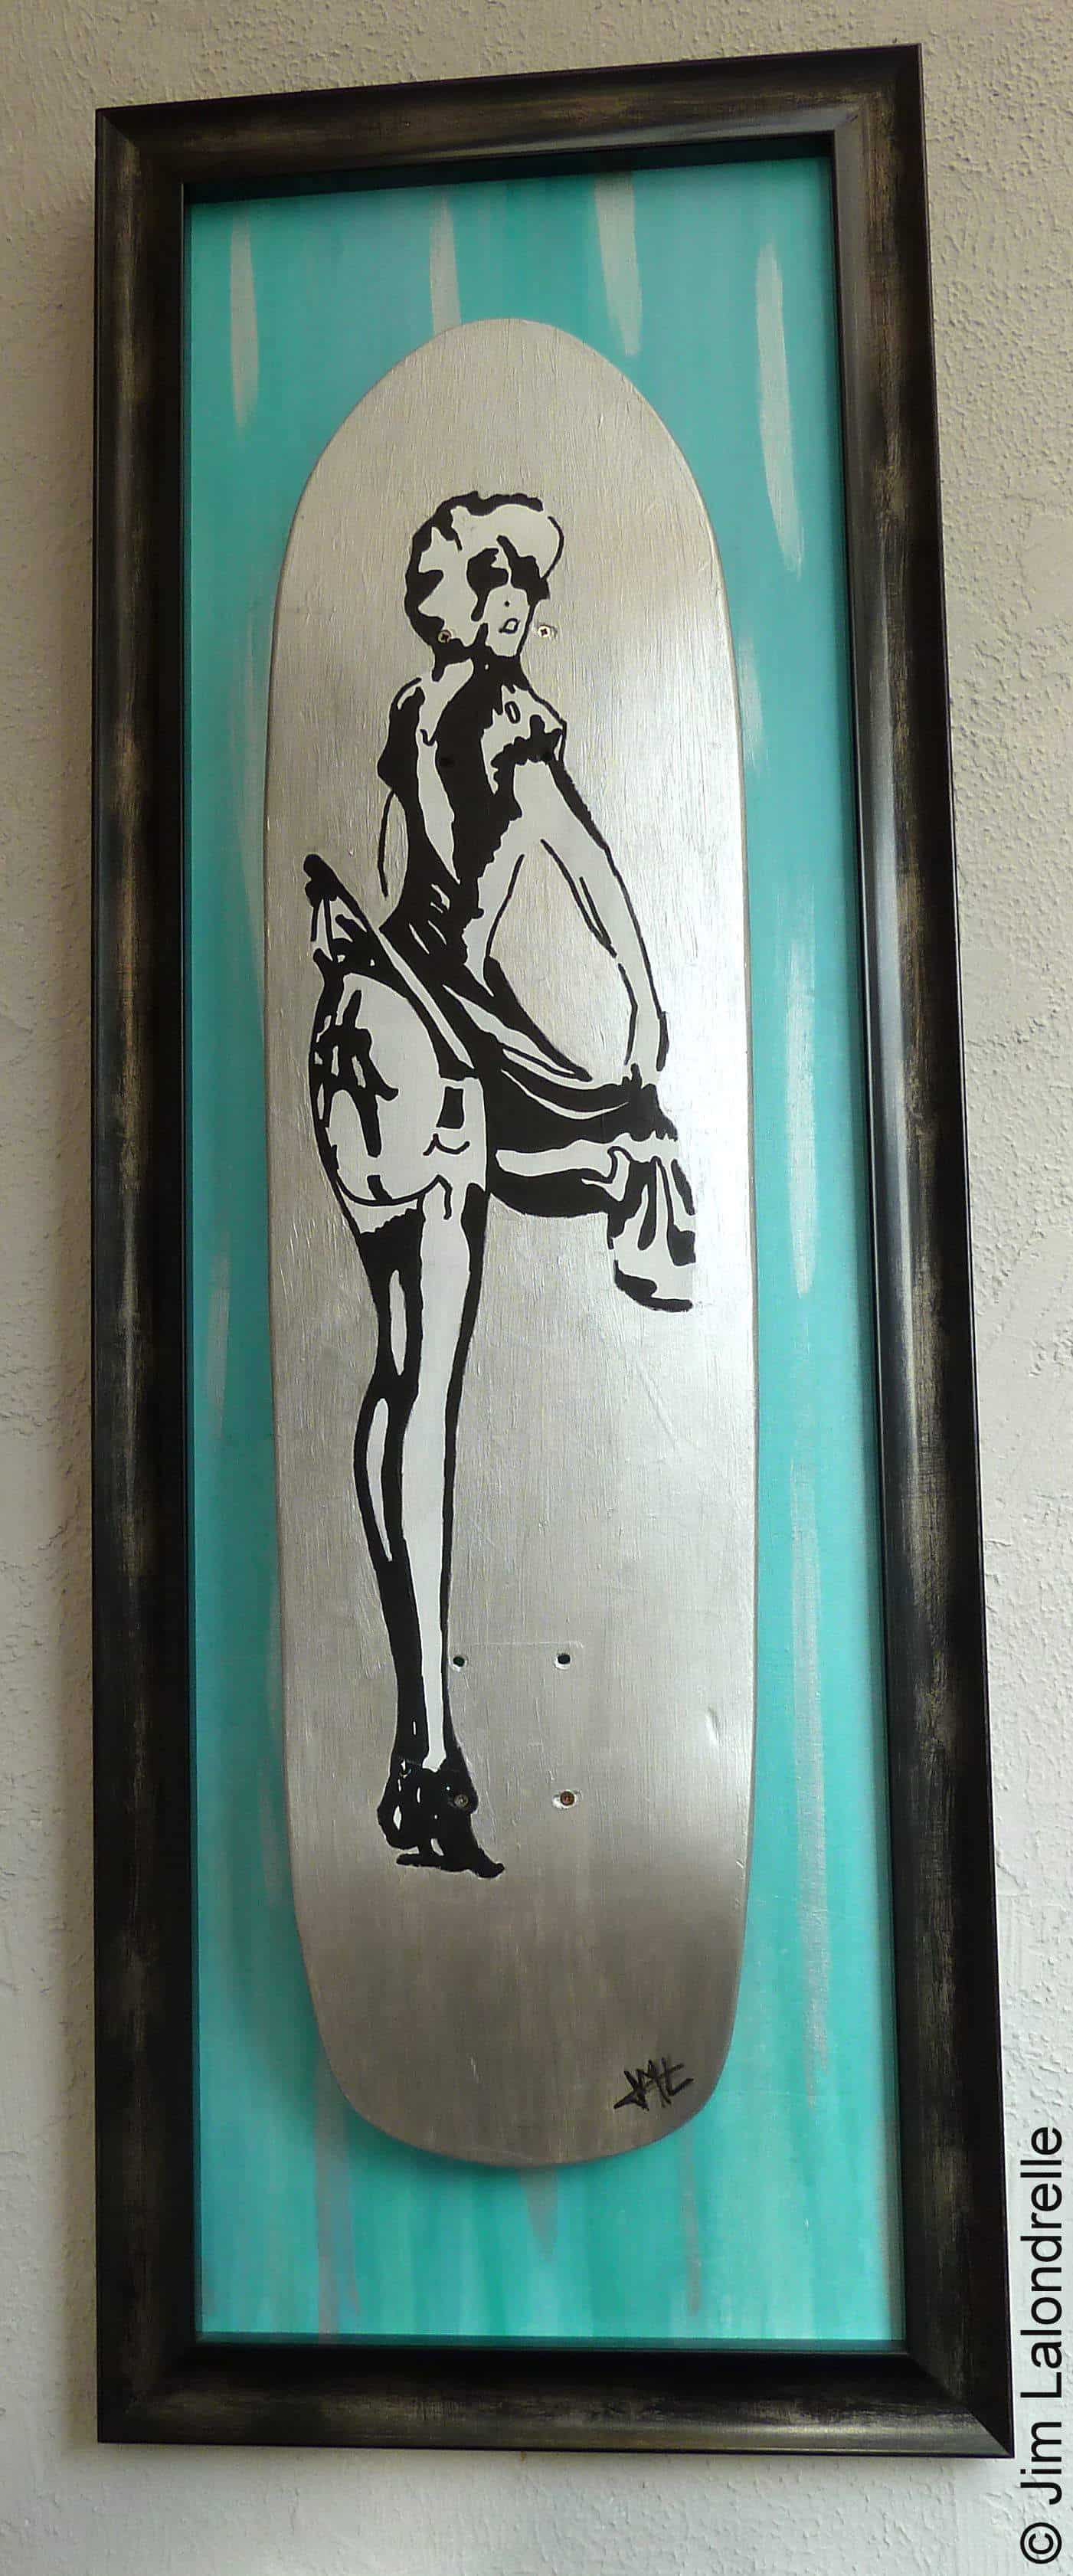 Framed and painted skateboard wall art